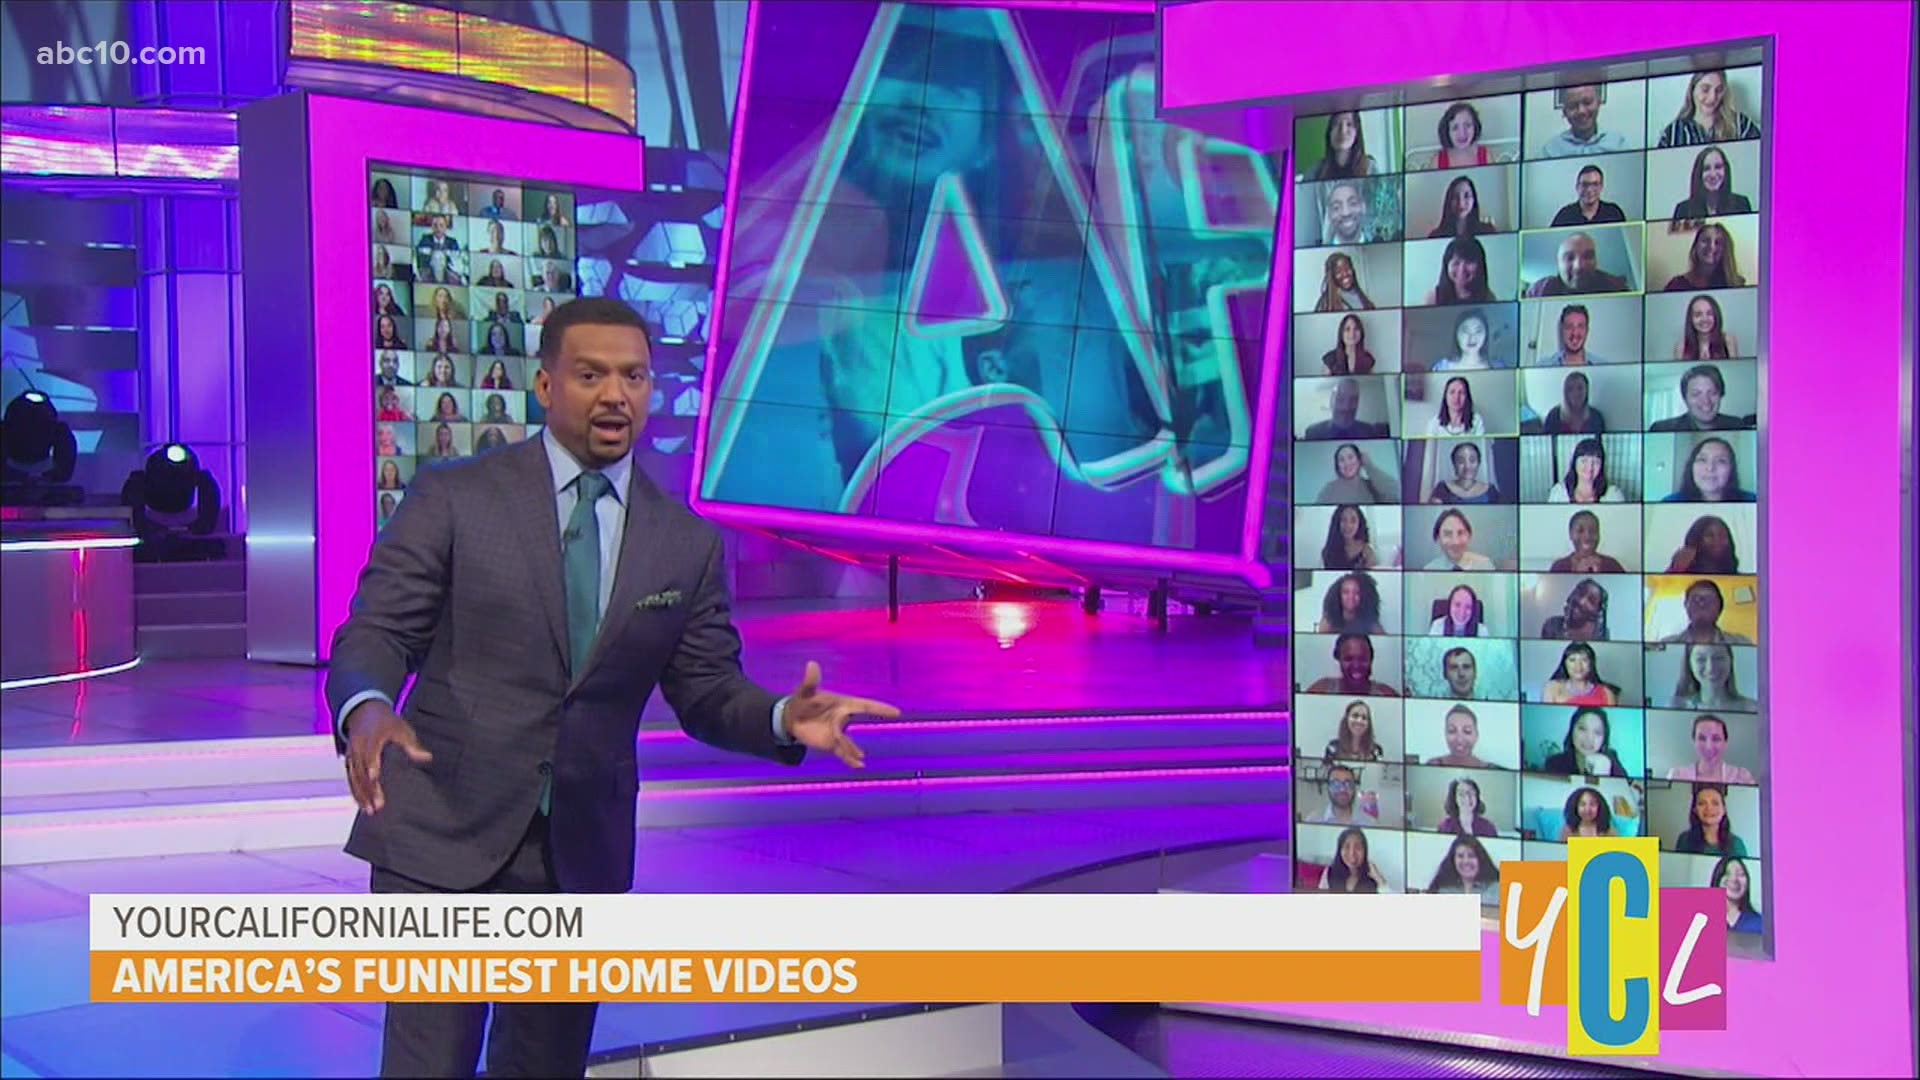 Host Alfonso Ribeiro talks about new features like a virtual audience panel this season on AFV, and tells YCL about the videos that make the cut to be on the show.